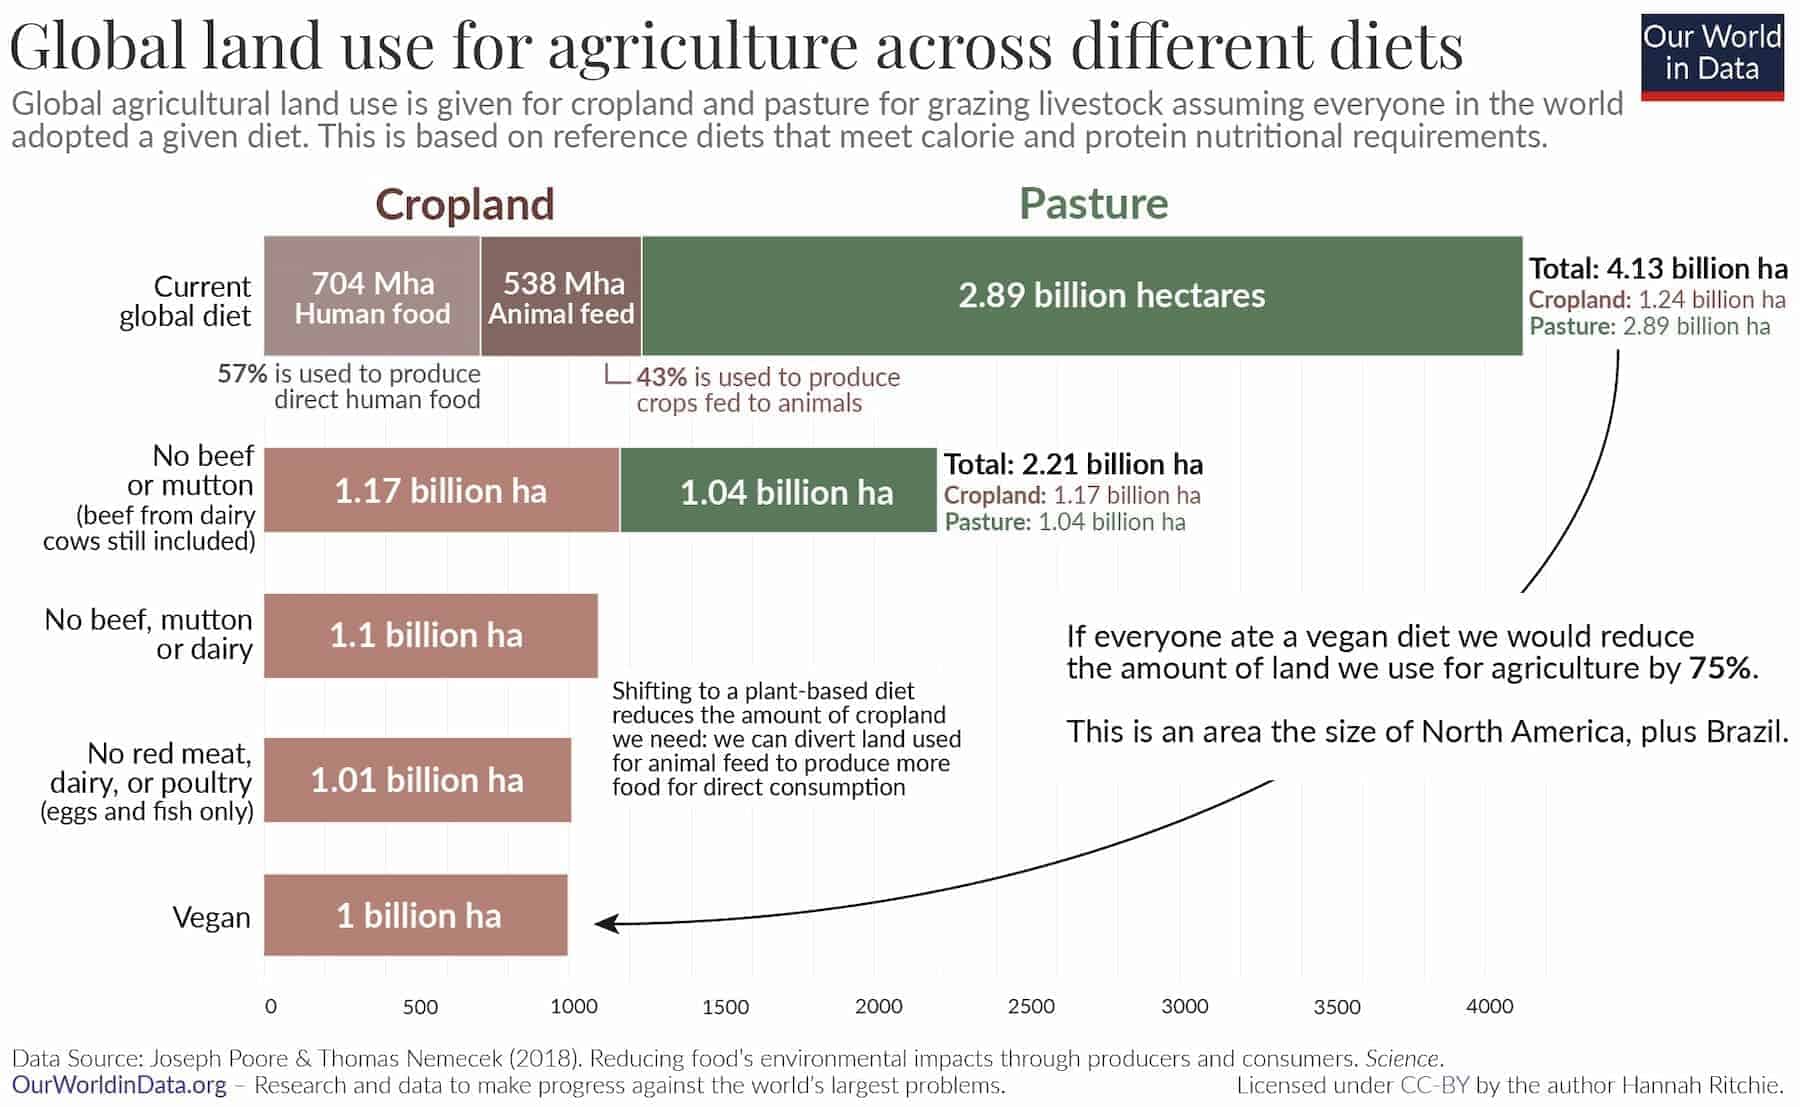 Graphic of global land use for agriculture across different diets, showing that a vegan diet uses the least amount of land.